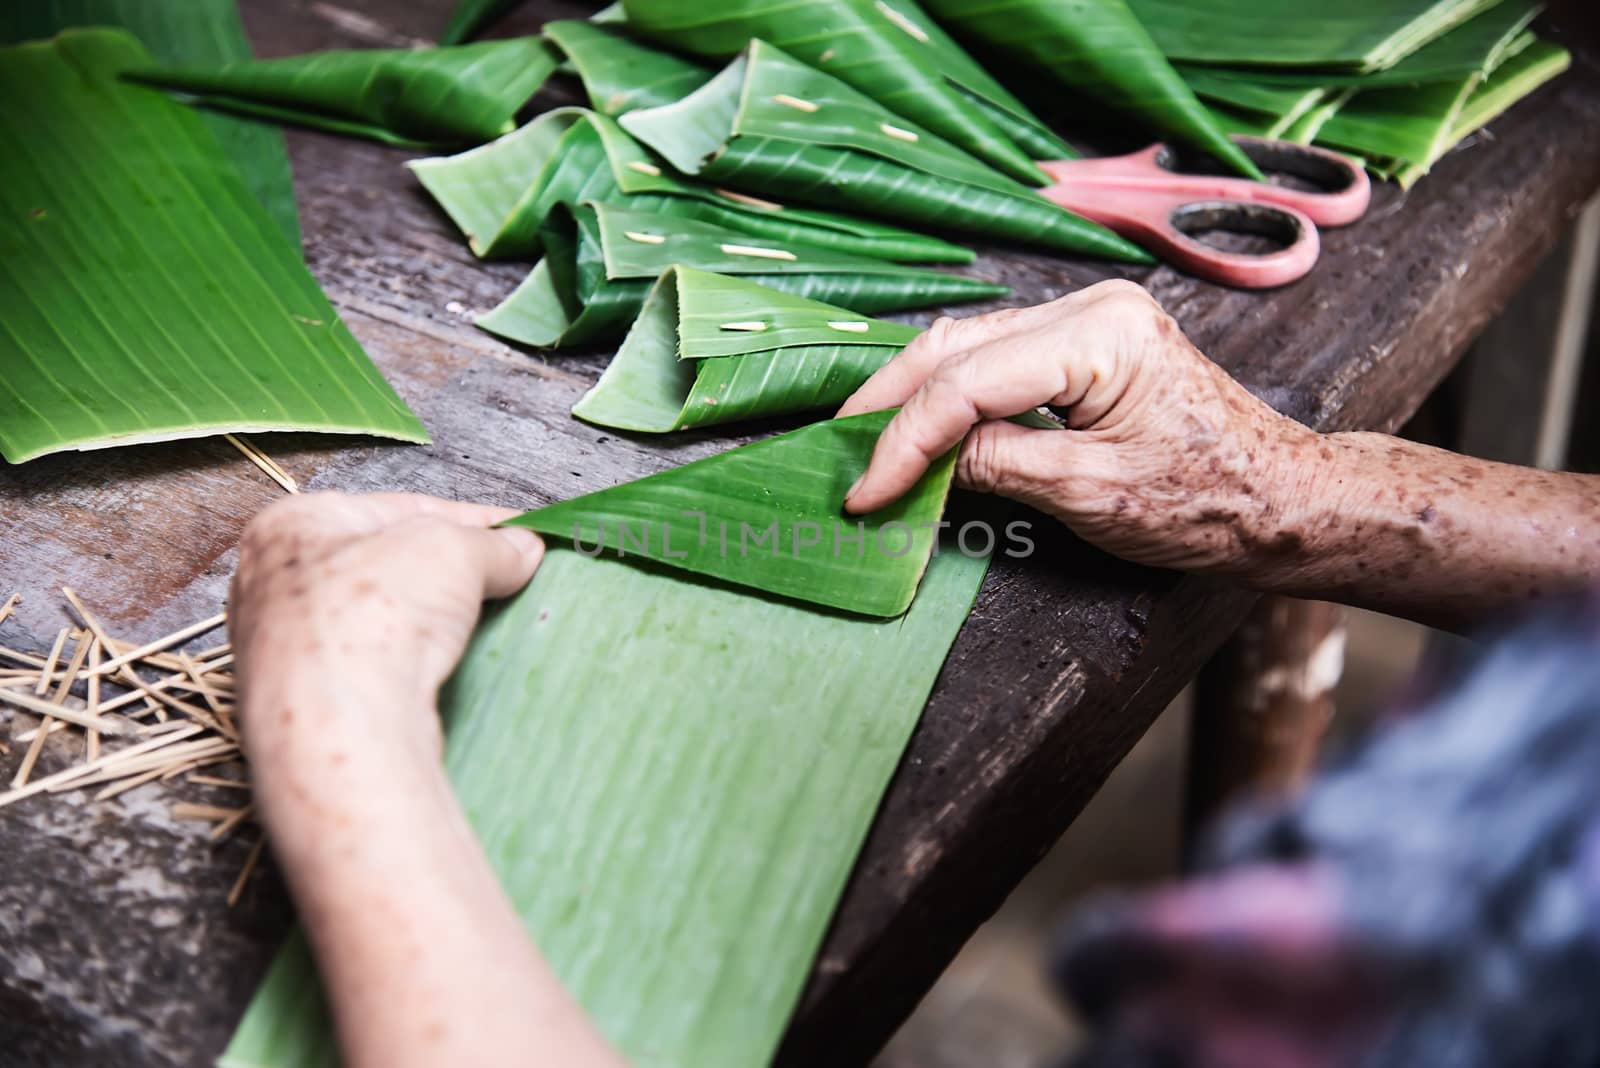 Old grandmother hands working with banana leaf for making flowers container - people making traditional item for local ceremony participation